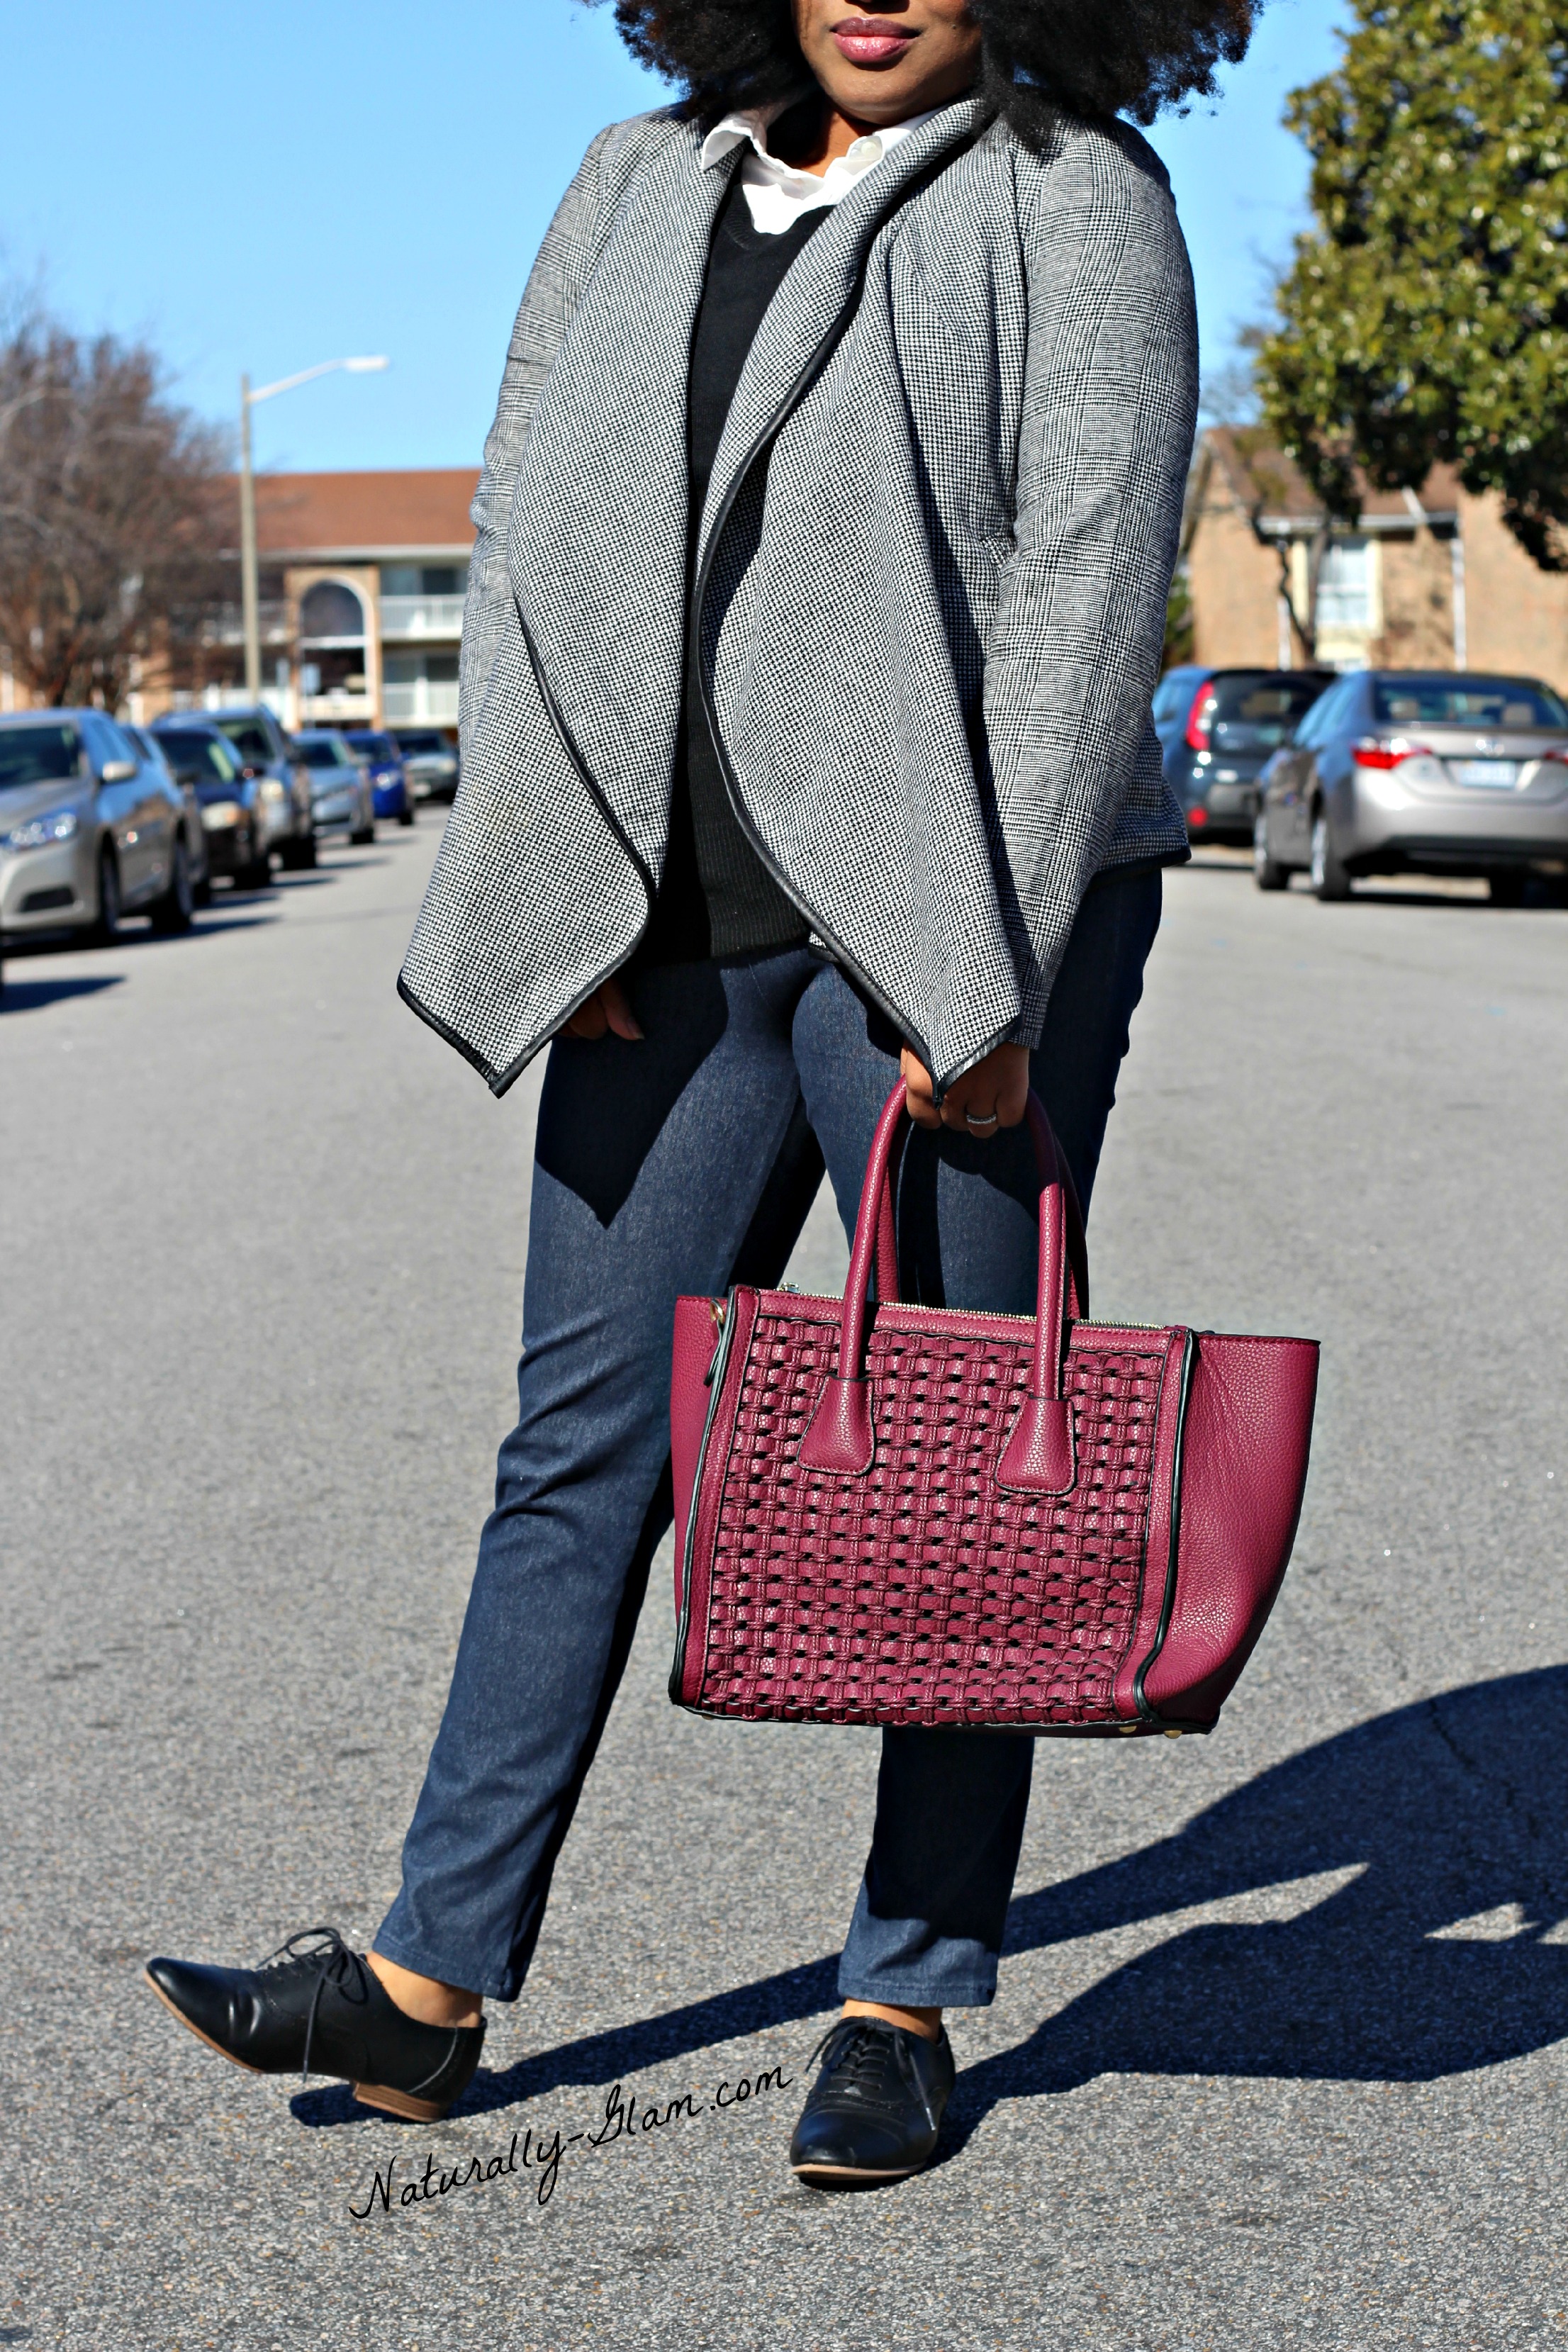 Burgundy Leather Tote Bag Outfits (145 ideas & outfits)